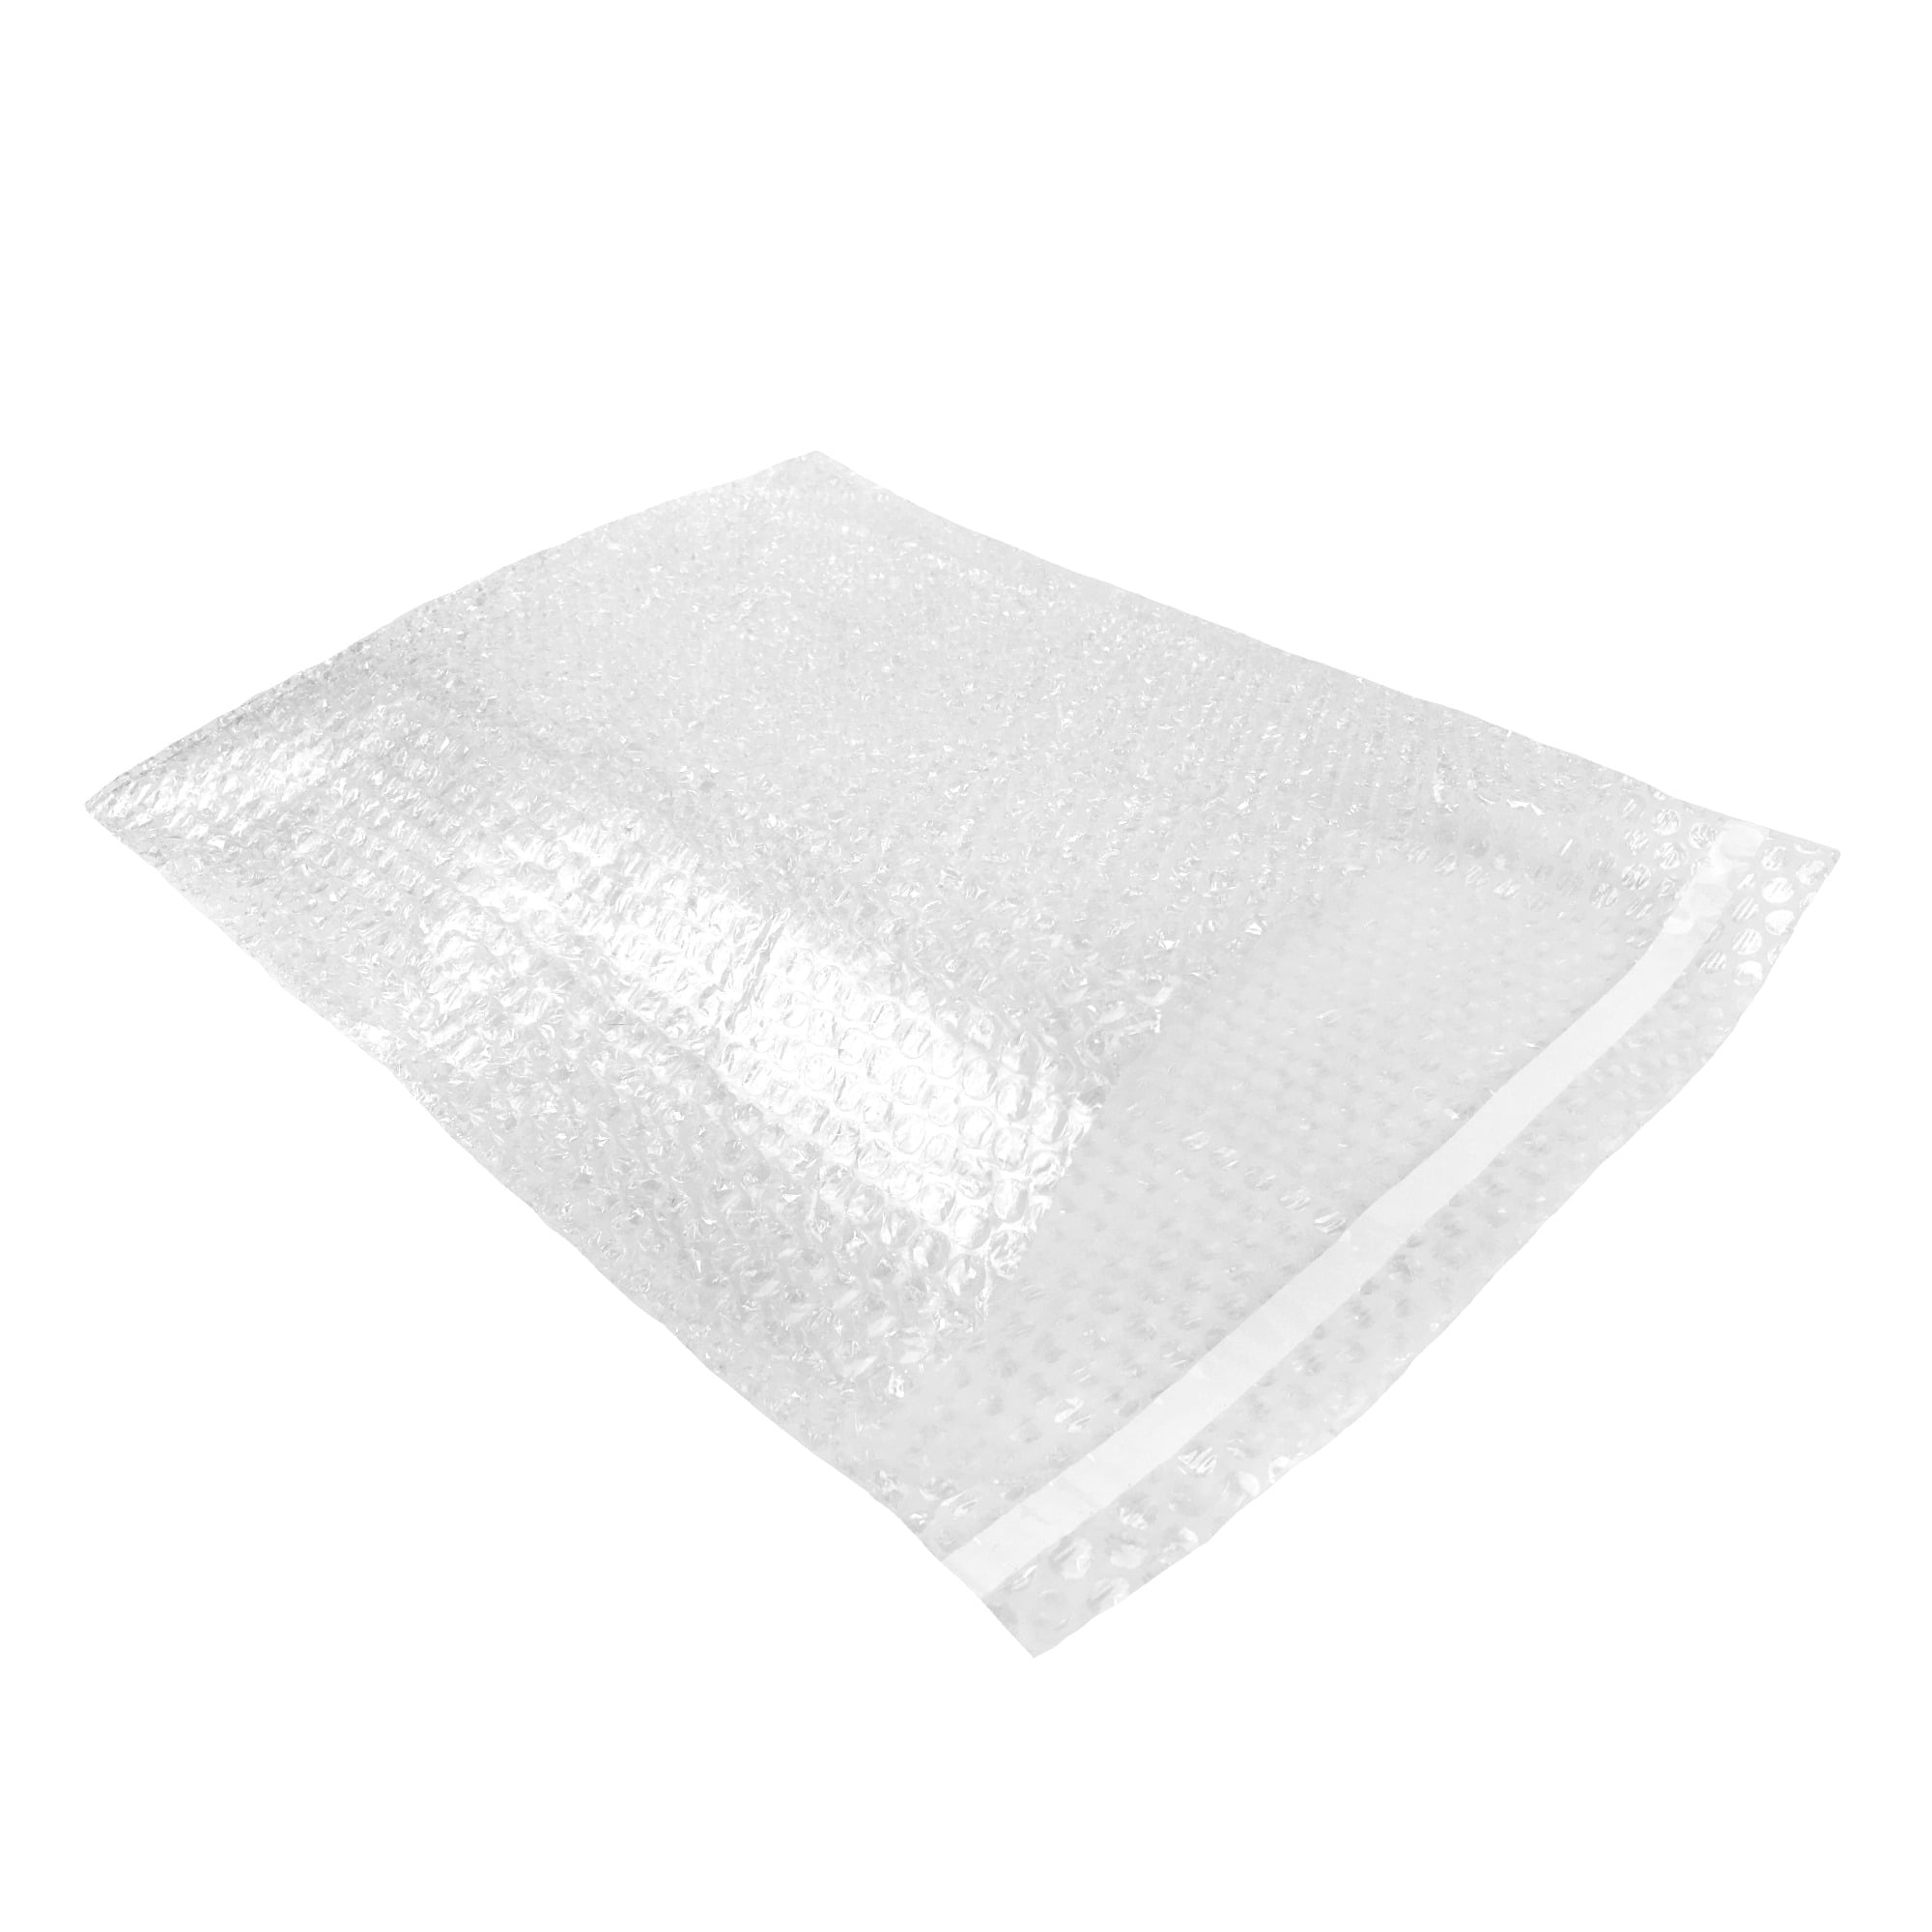 100-8x11.5 Bubble Out Pouches Bags Wrap Cushioning Self Seal Clear 8" x 11.5" 